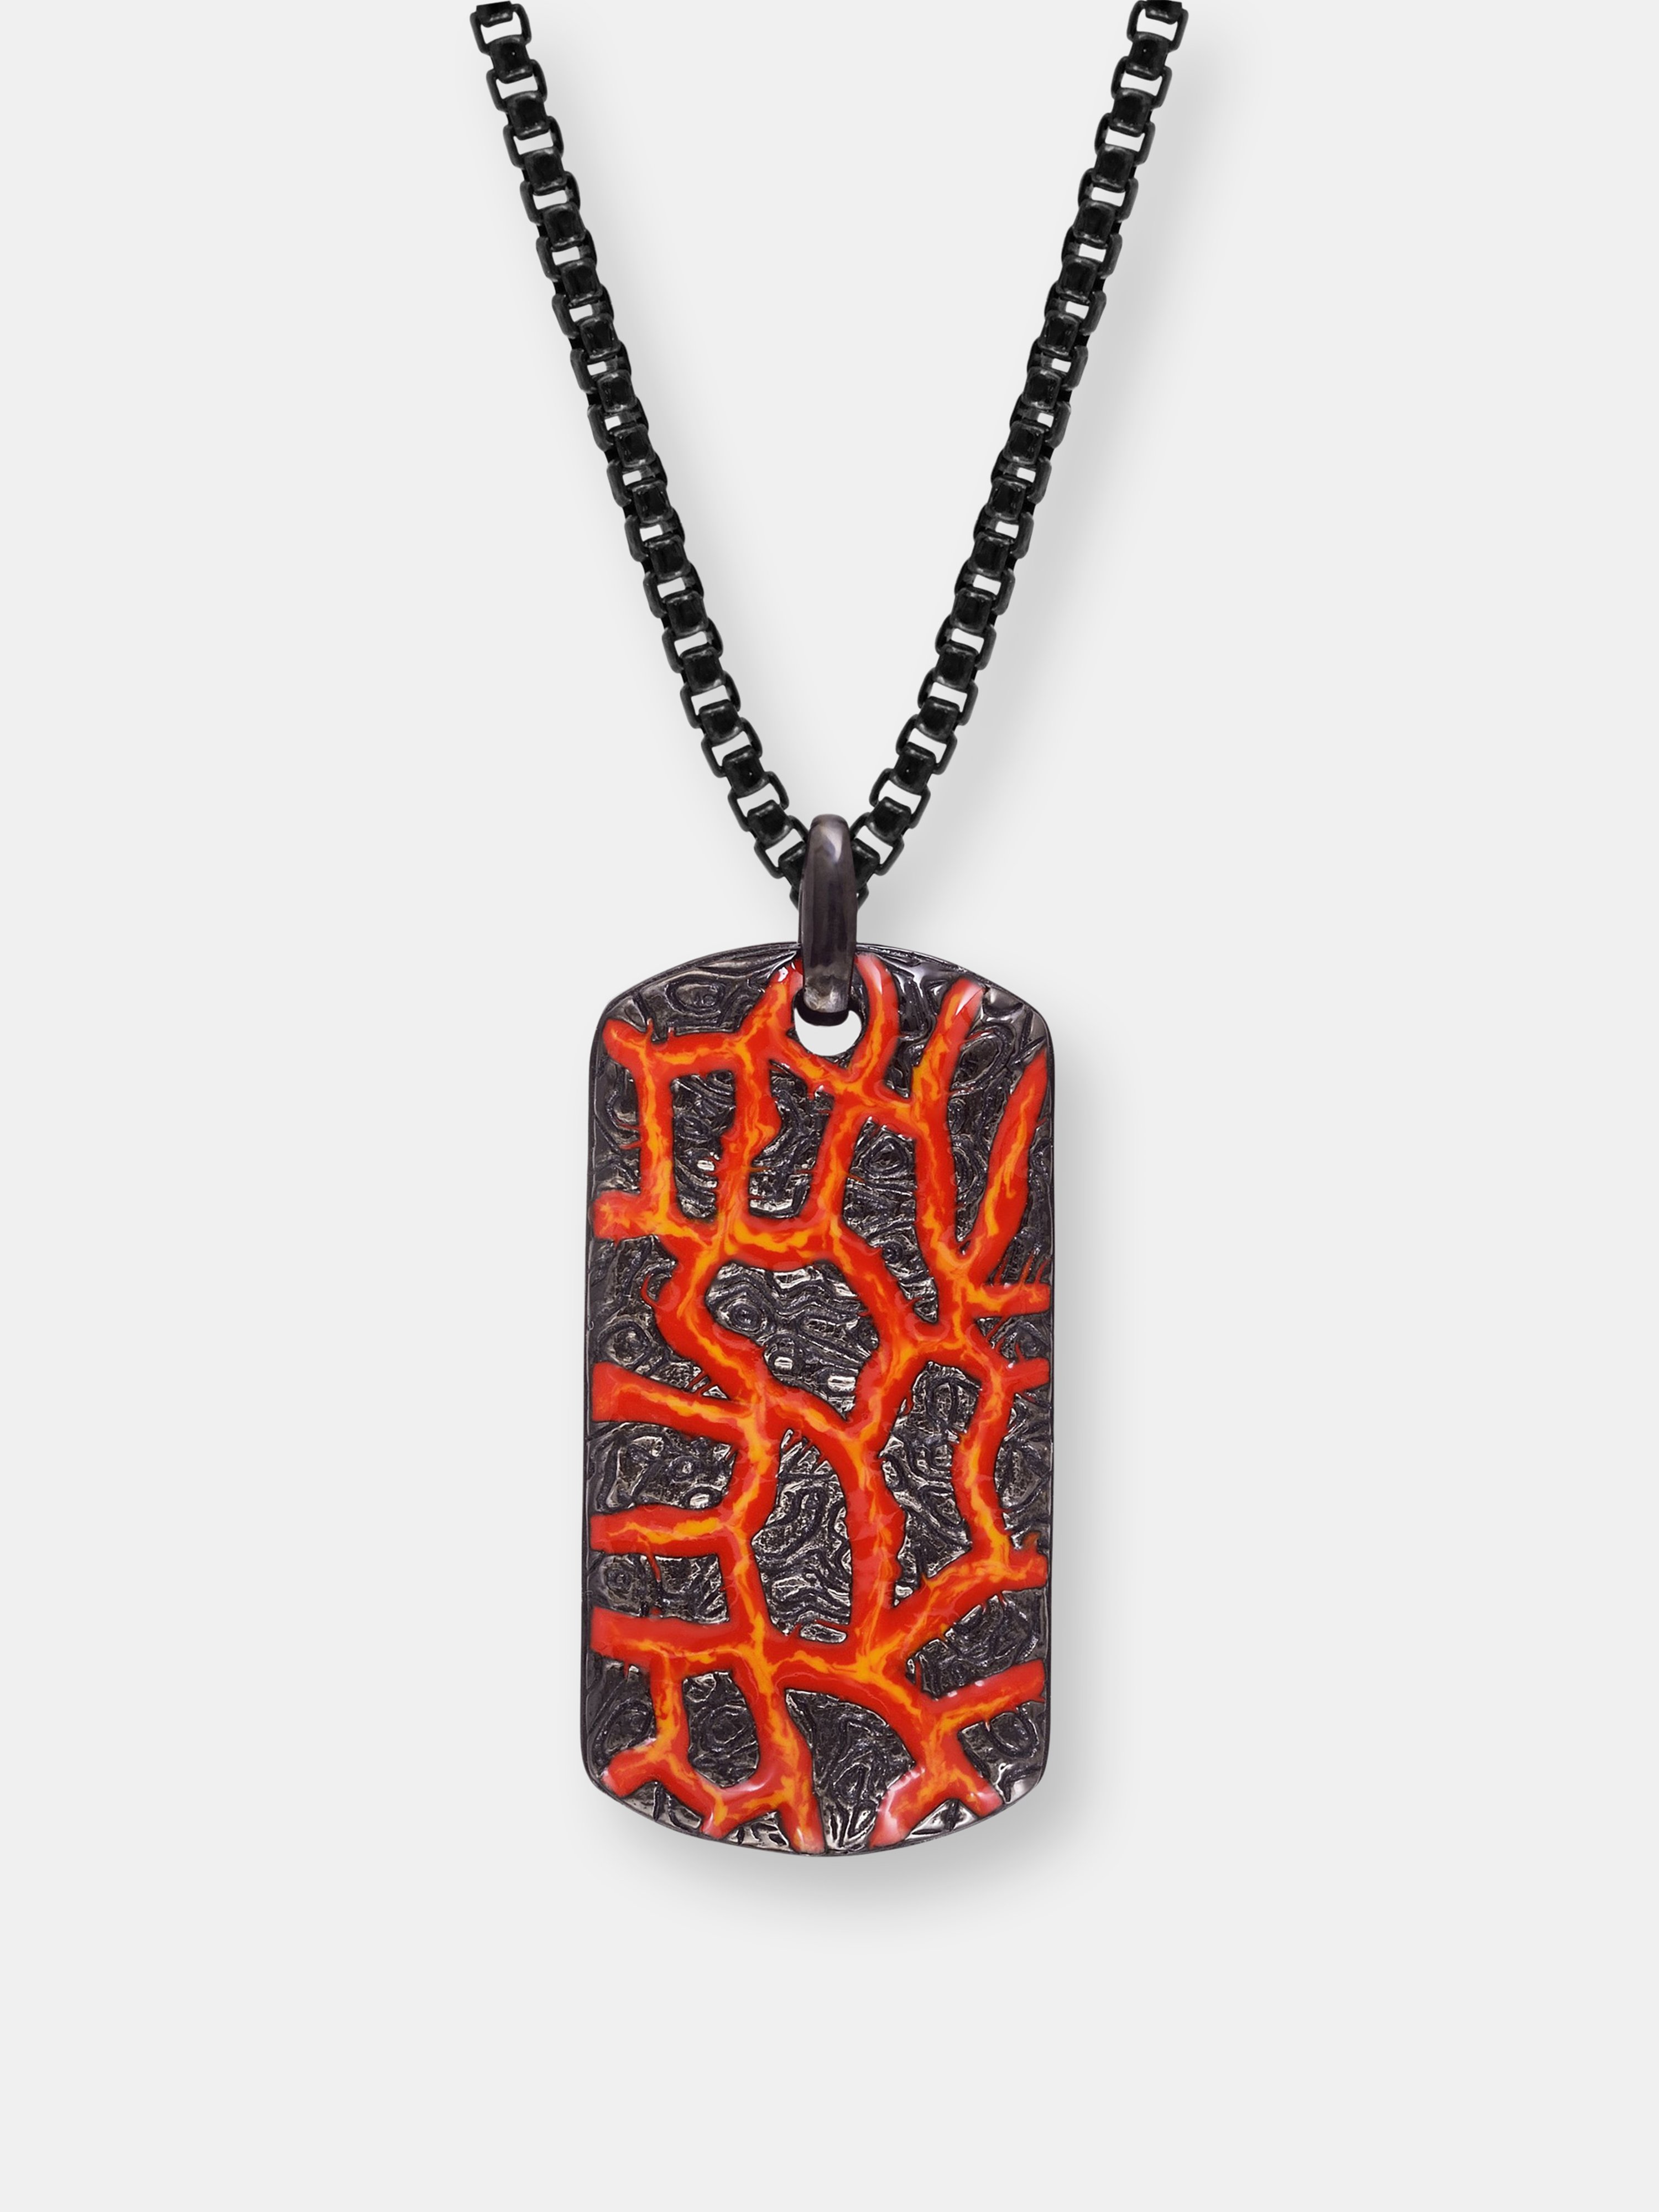 LUVMYJEWELRY LUVMYJEWELRY RIVERS OF FIRE BLACK RHODIUM PLATED STERLING SILVER TEXTURED RED ORANGE ENAMEL TAG